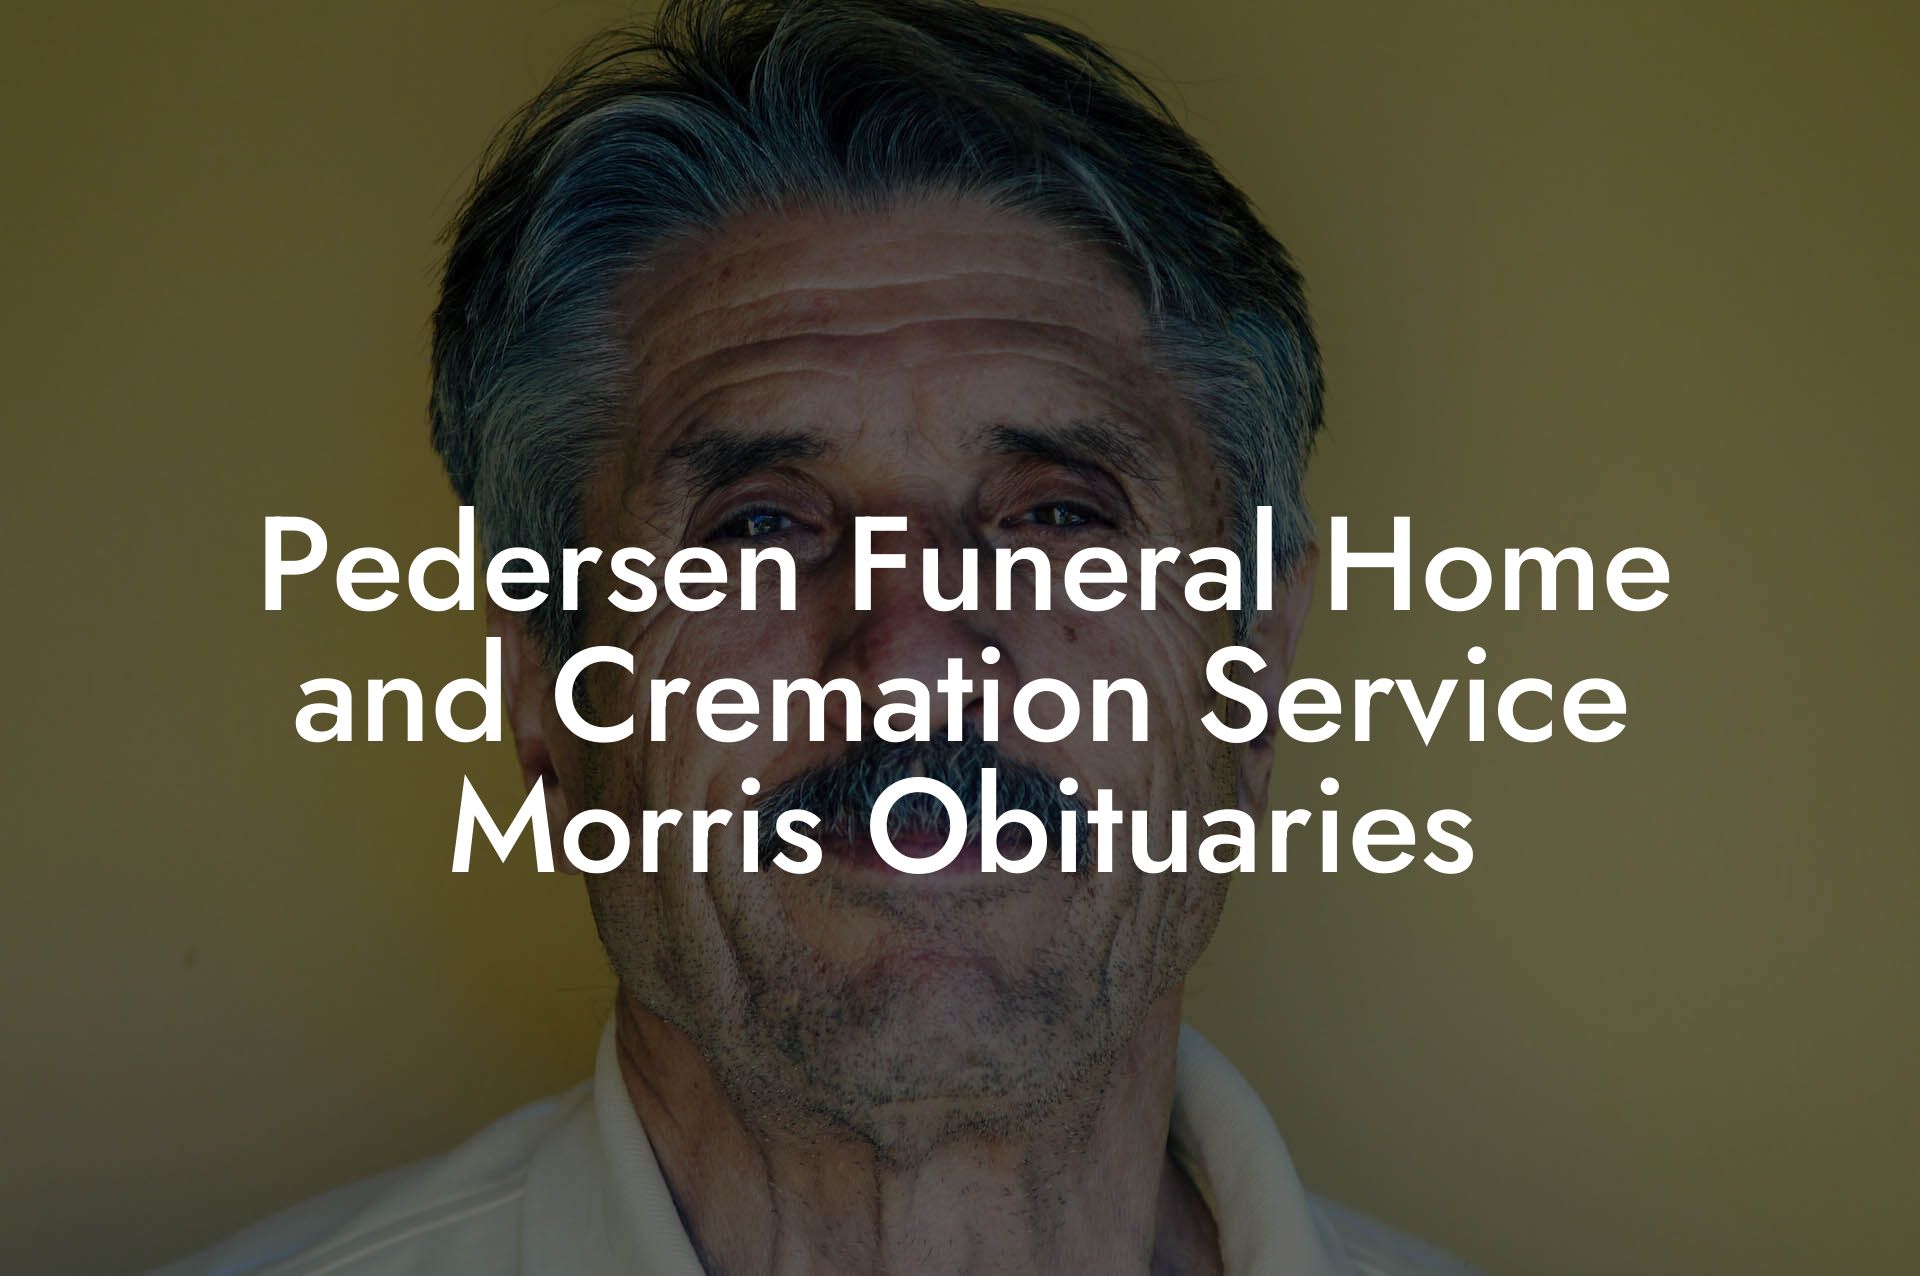 Pedersen Funeral Home and Cremation Service Morris Obituaries